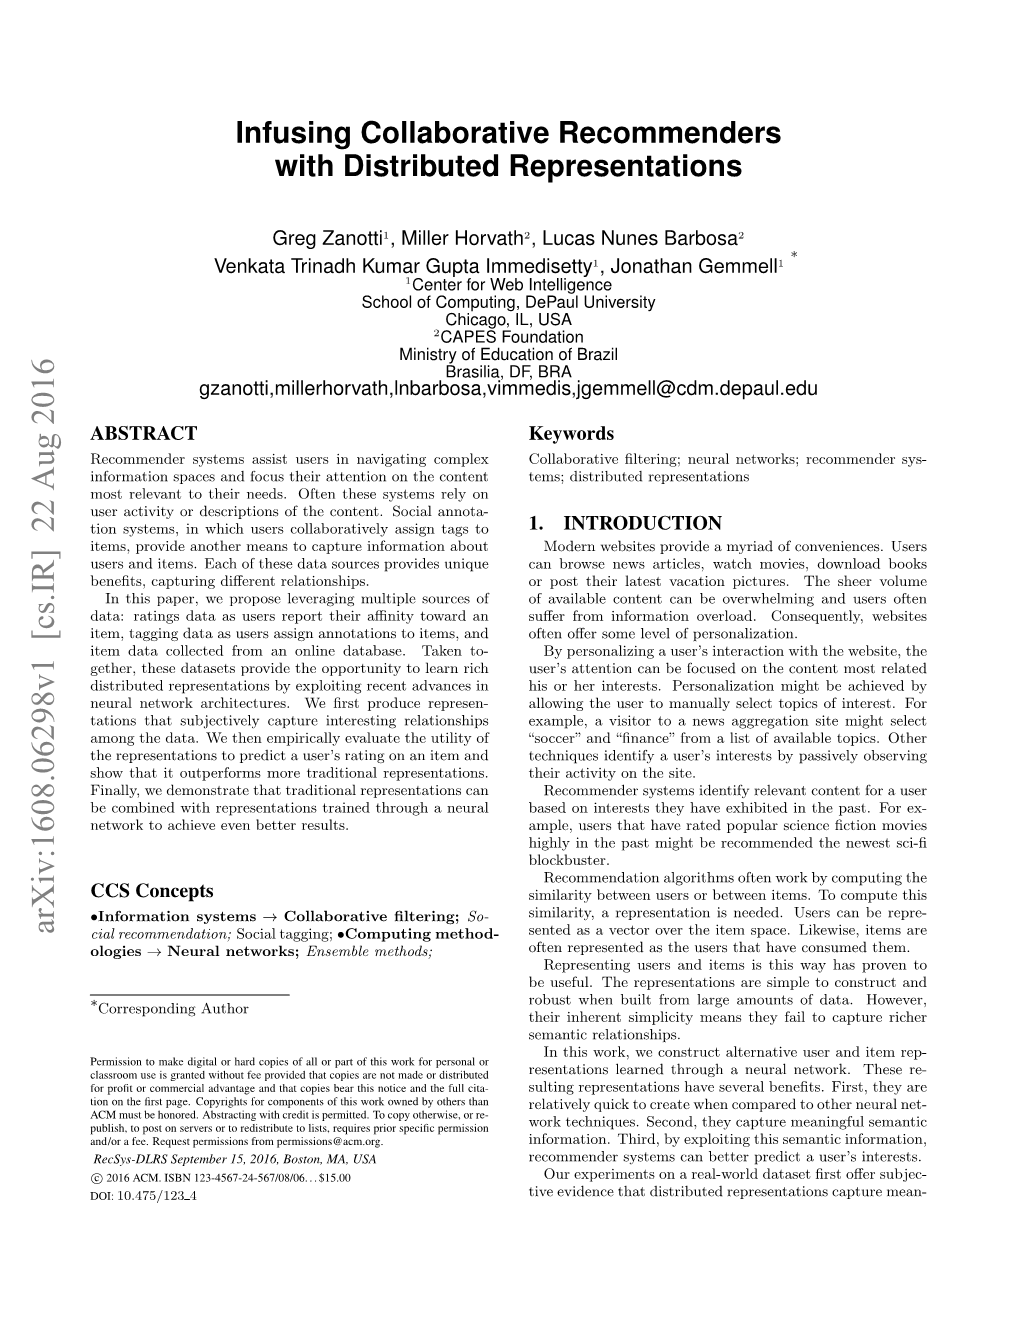 Infusing Collaborative Recommenders with Distributed Representations